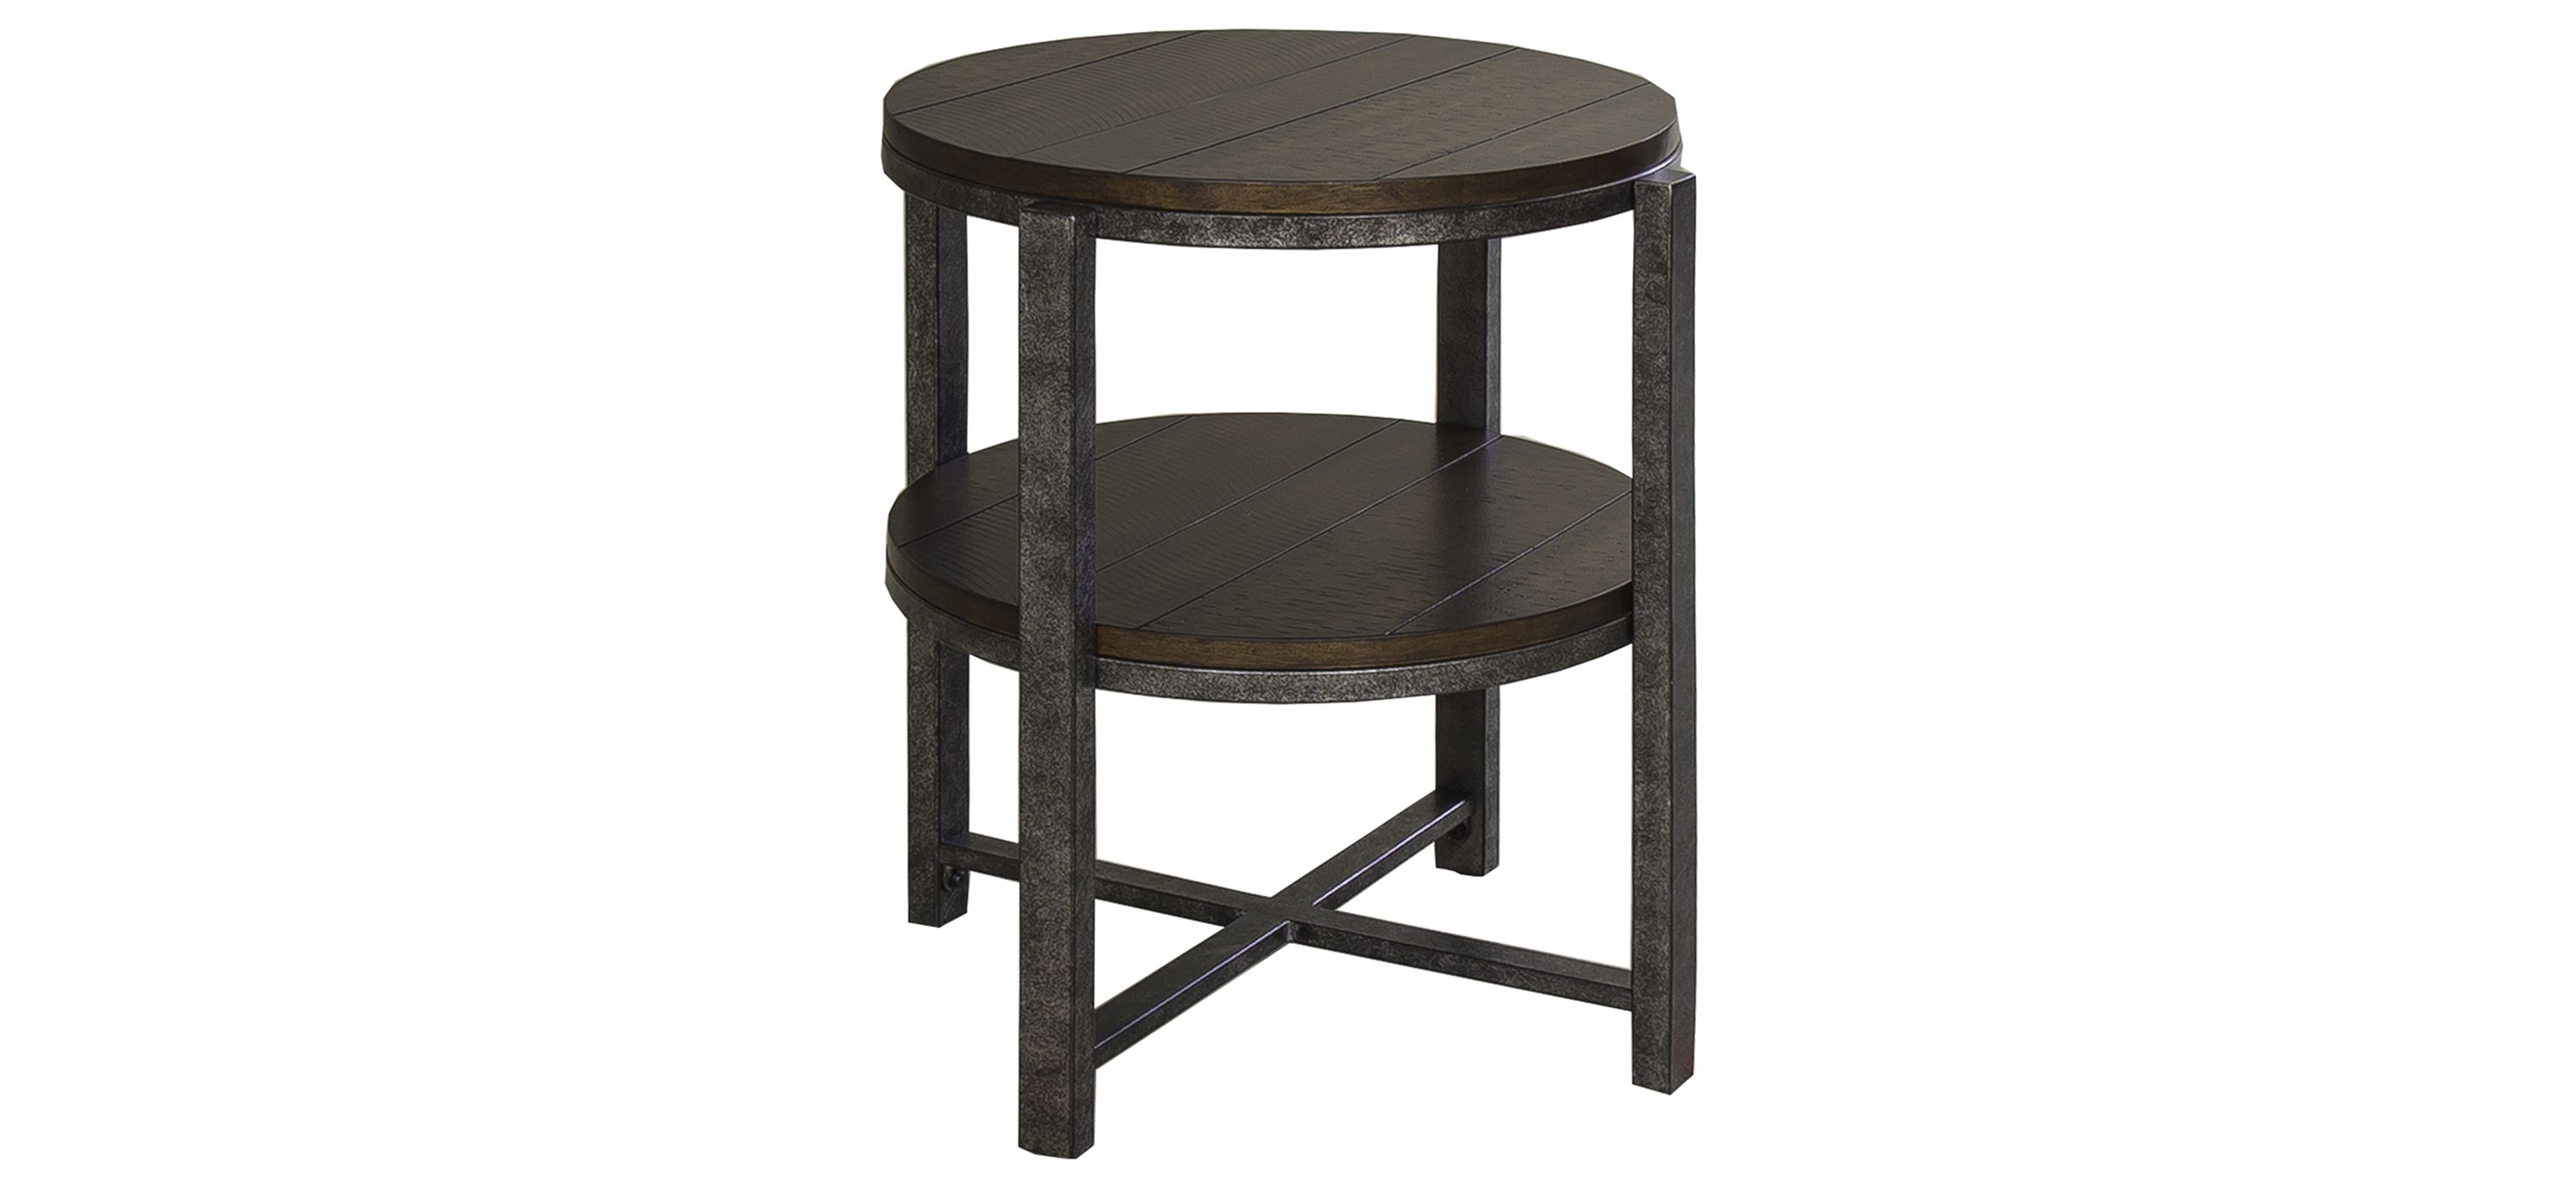 Ellery Round End Table